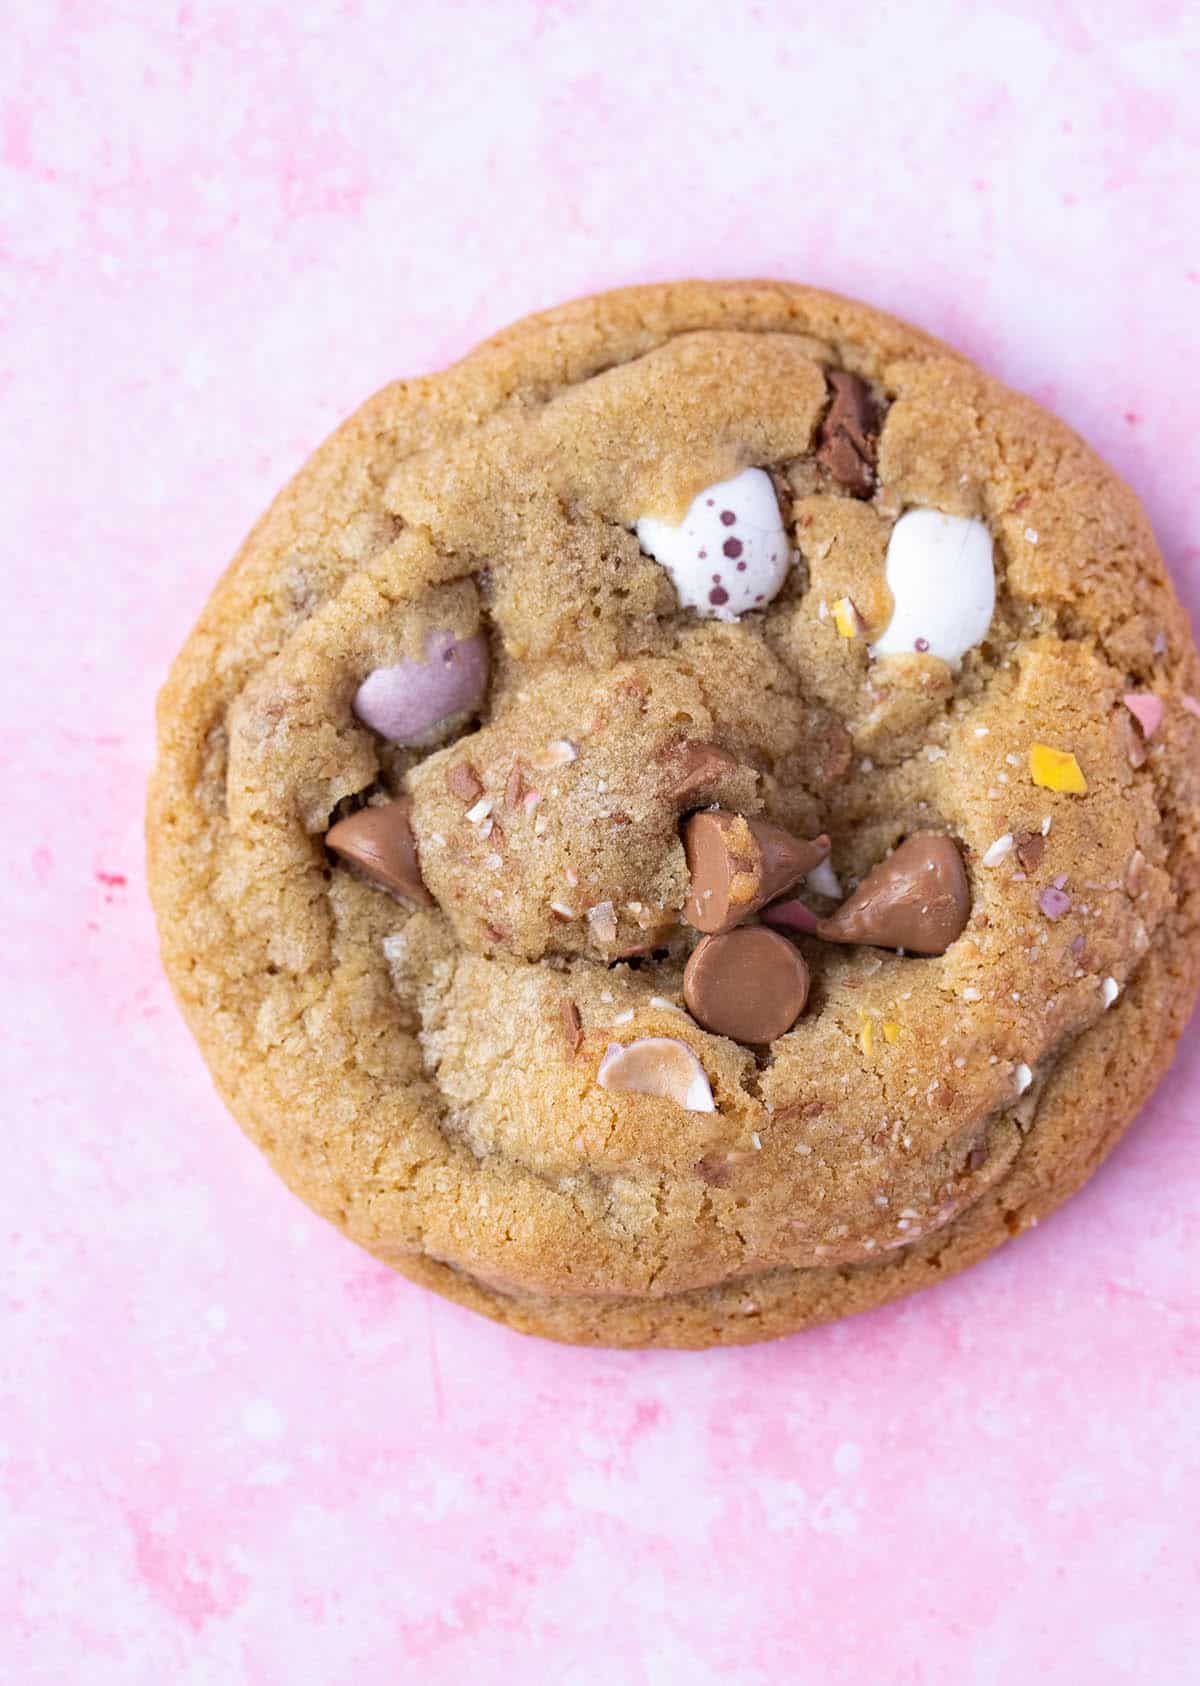 Top view of Mini Egg Cookie sitting on a pink background.